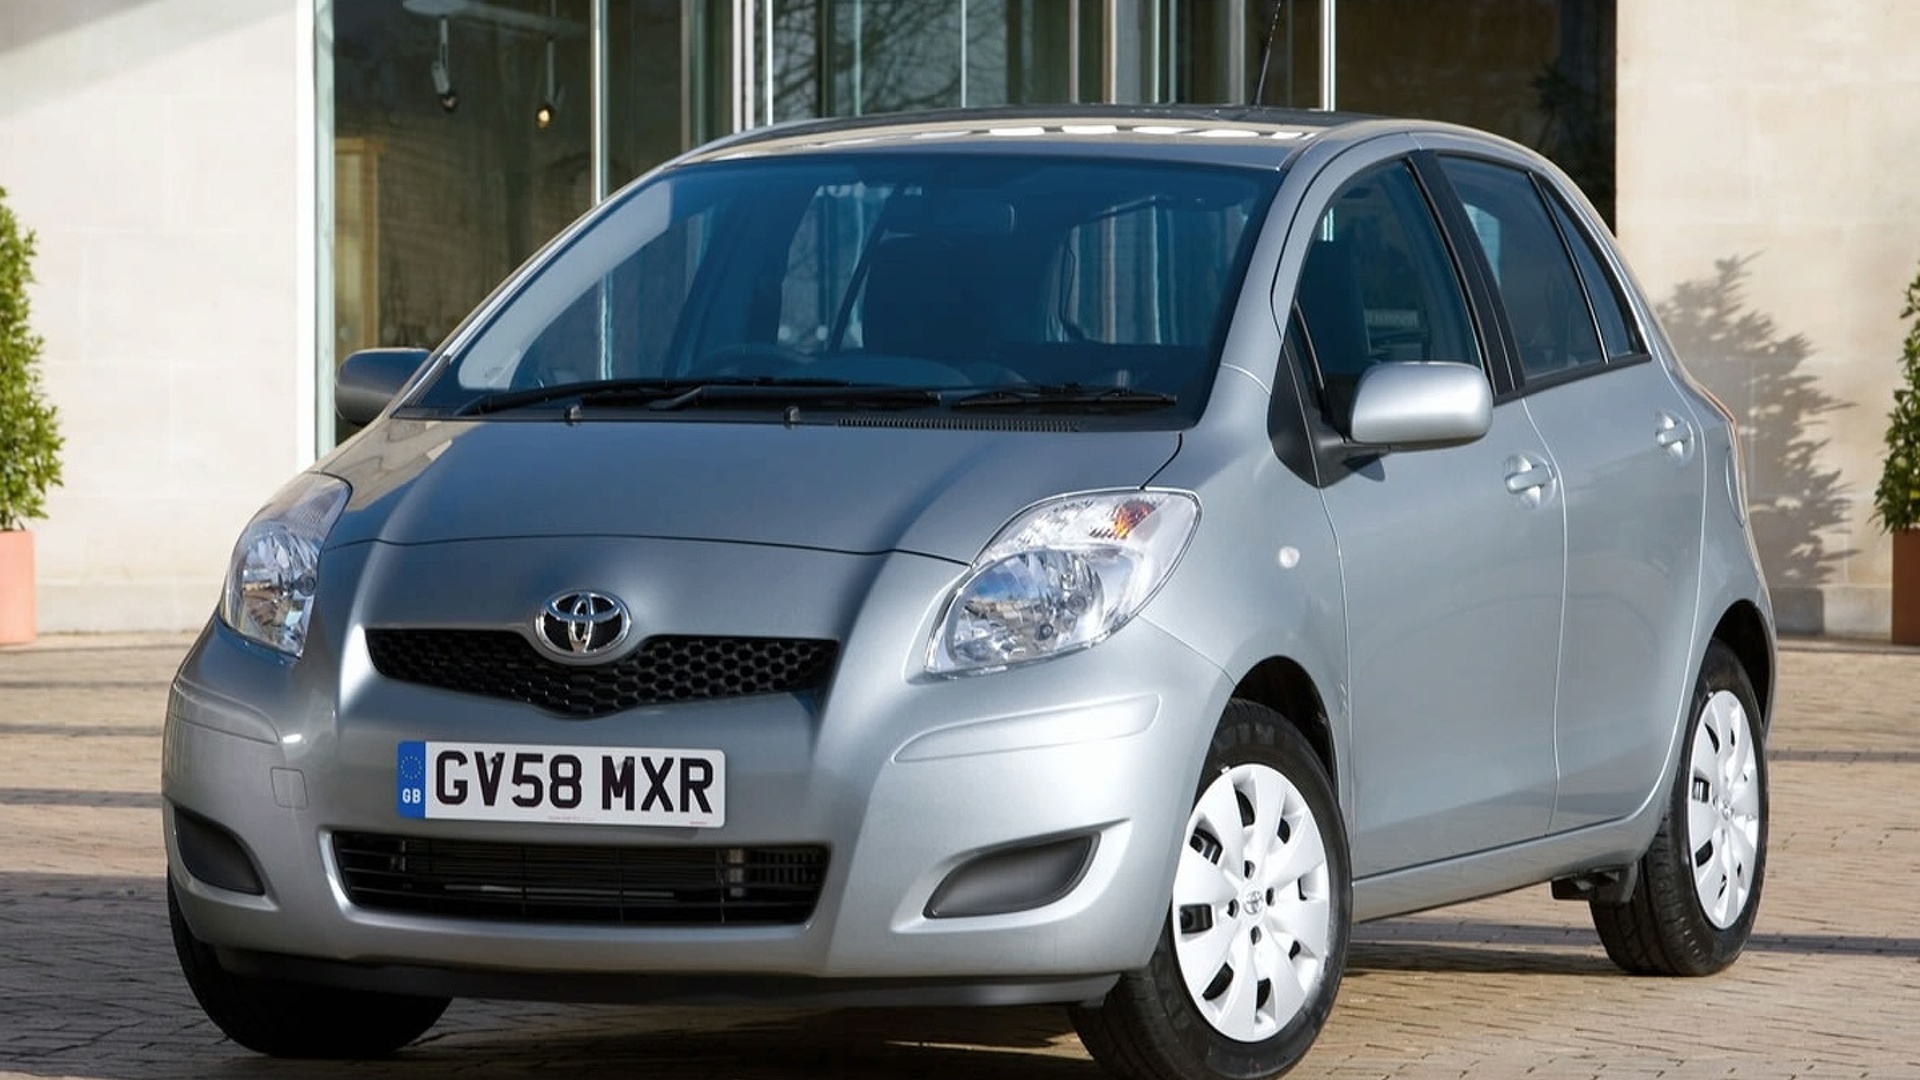 2009 Toyota Yaris Welcomes New 1.33-litre Dual VVT-i engine with Stop/Start  Technology